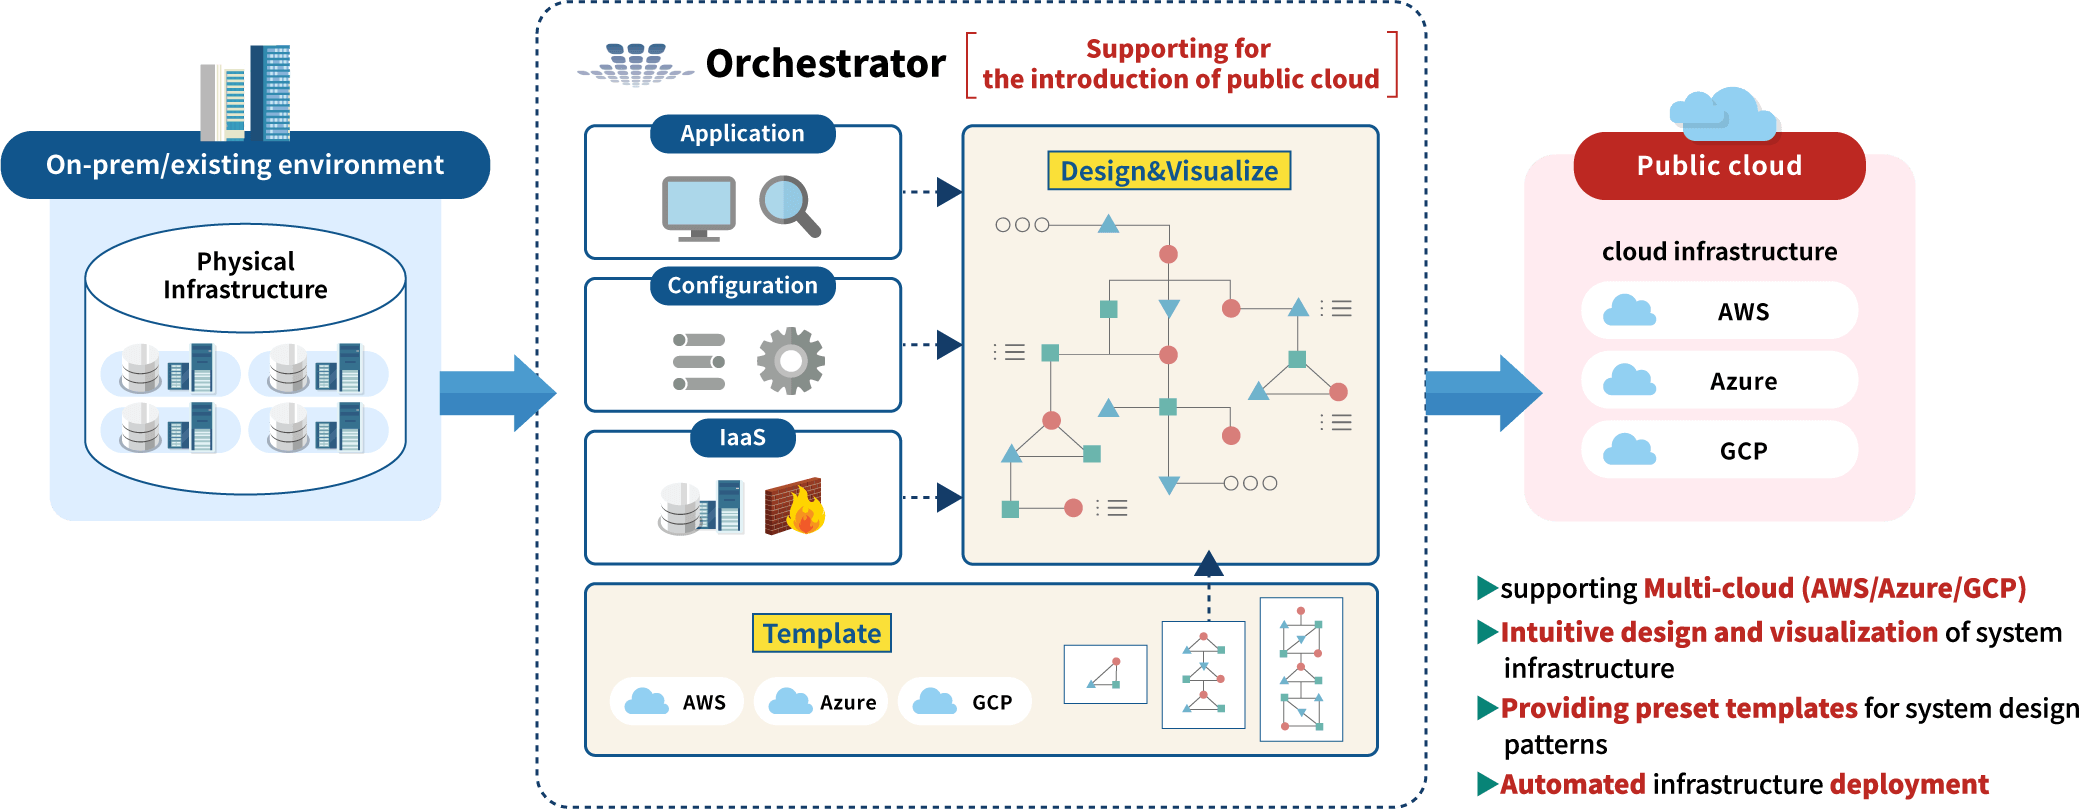 orchestrator-eng-image-p4.png